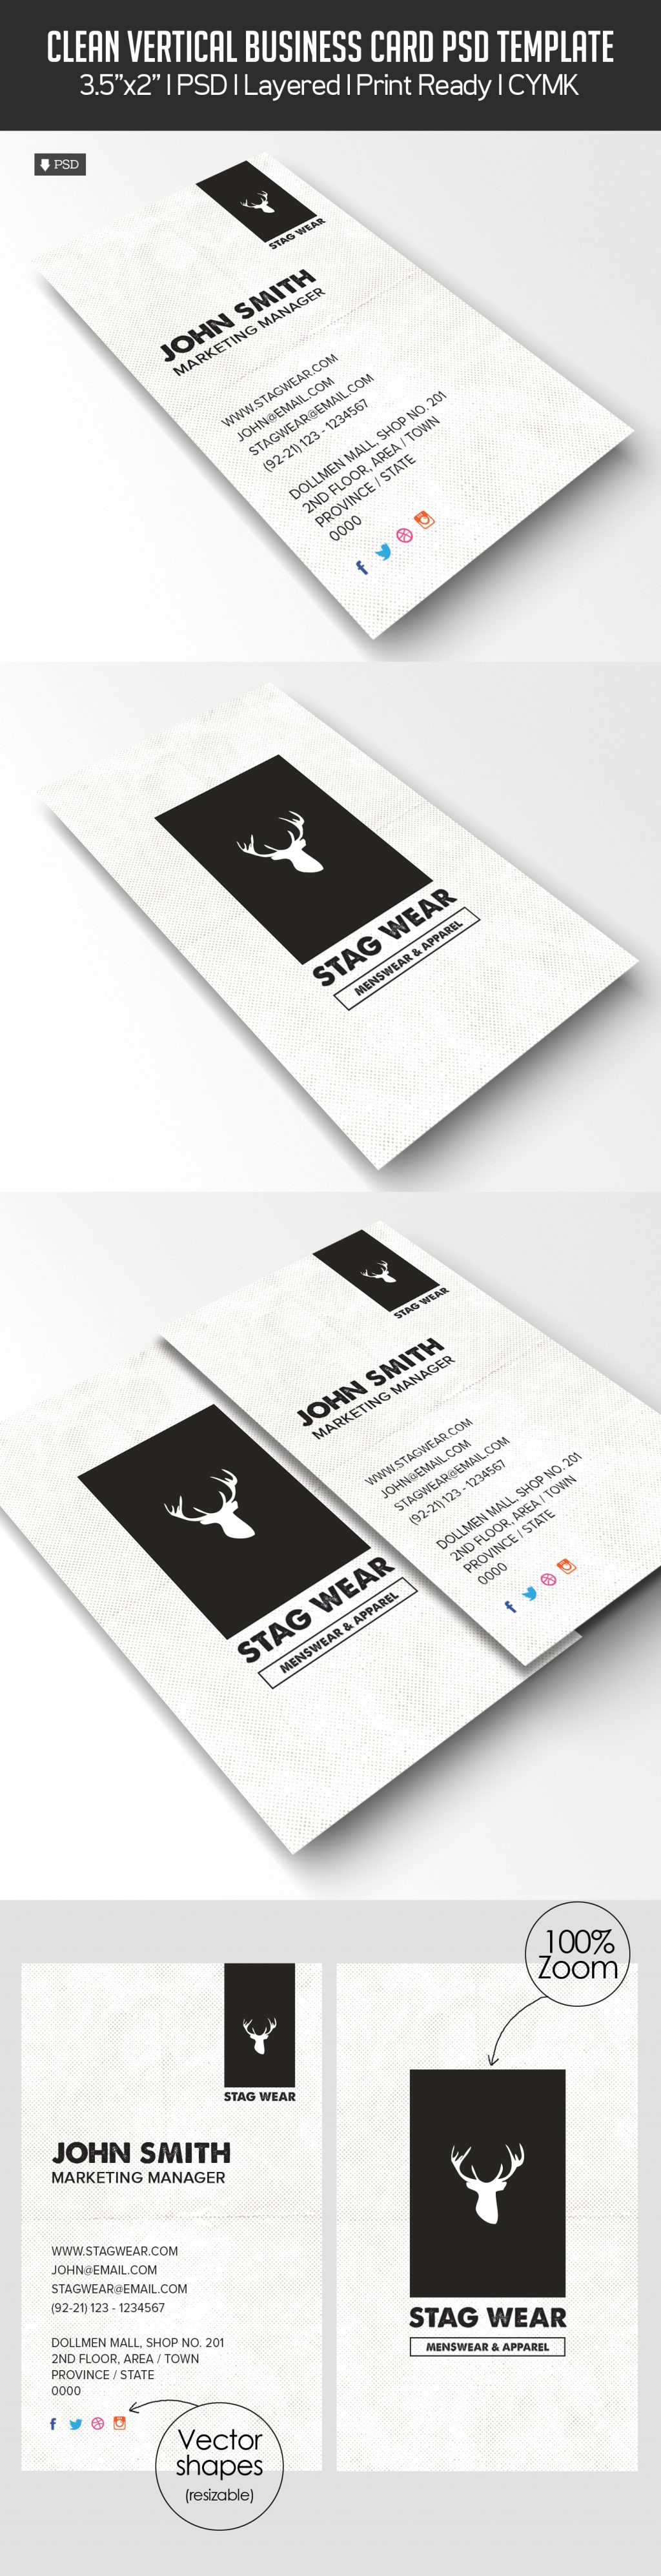 Free Blank Business Card Template P Download Design Sheet Of Business Cards Psd Template